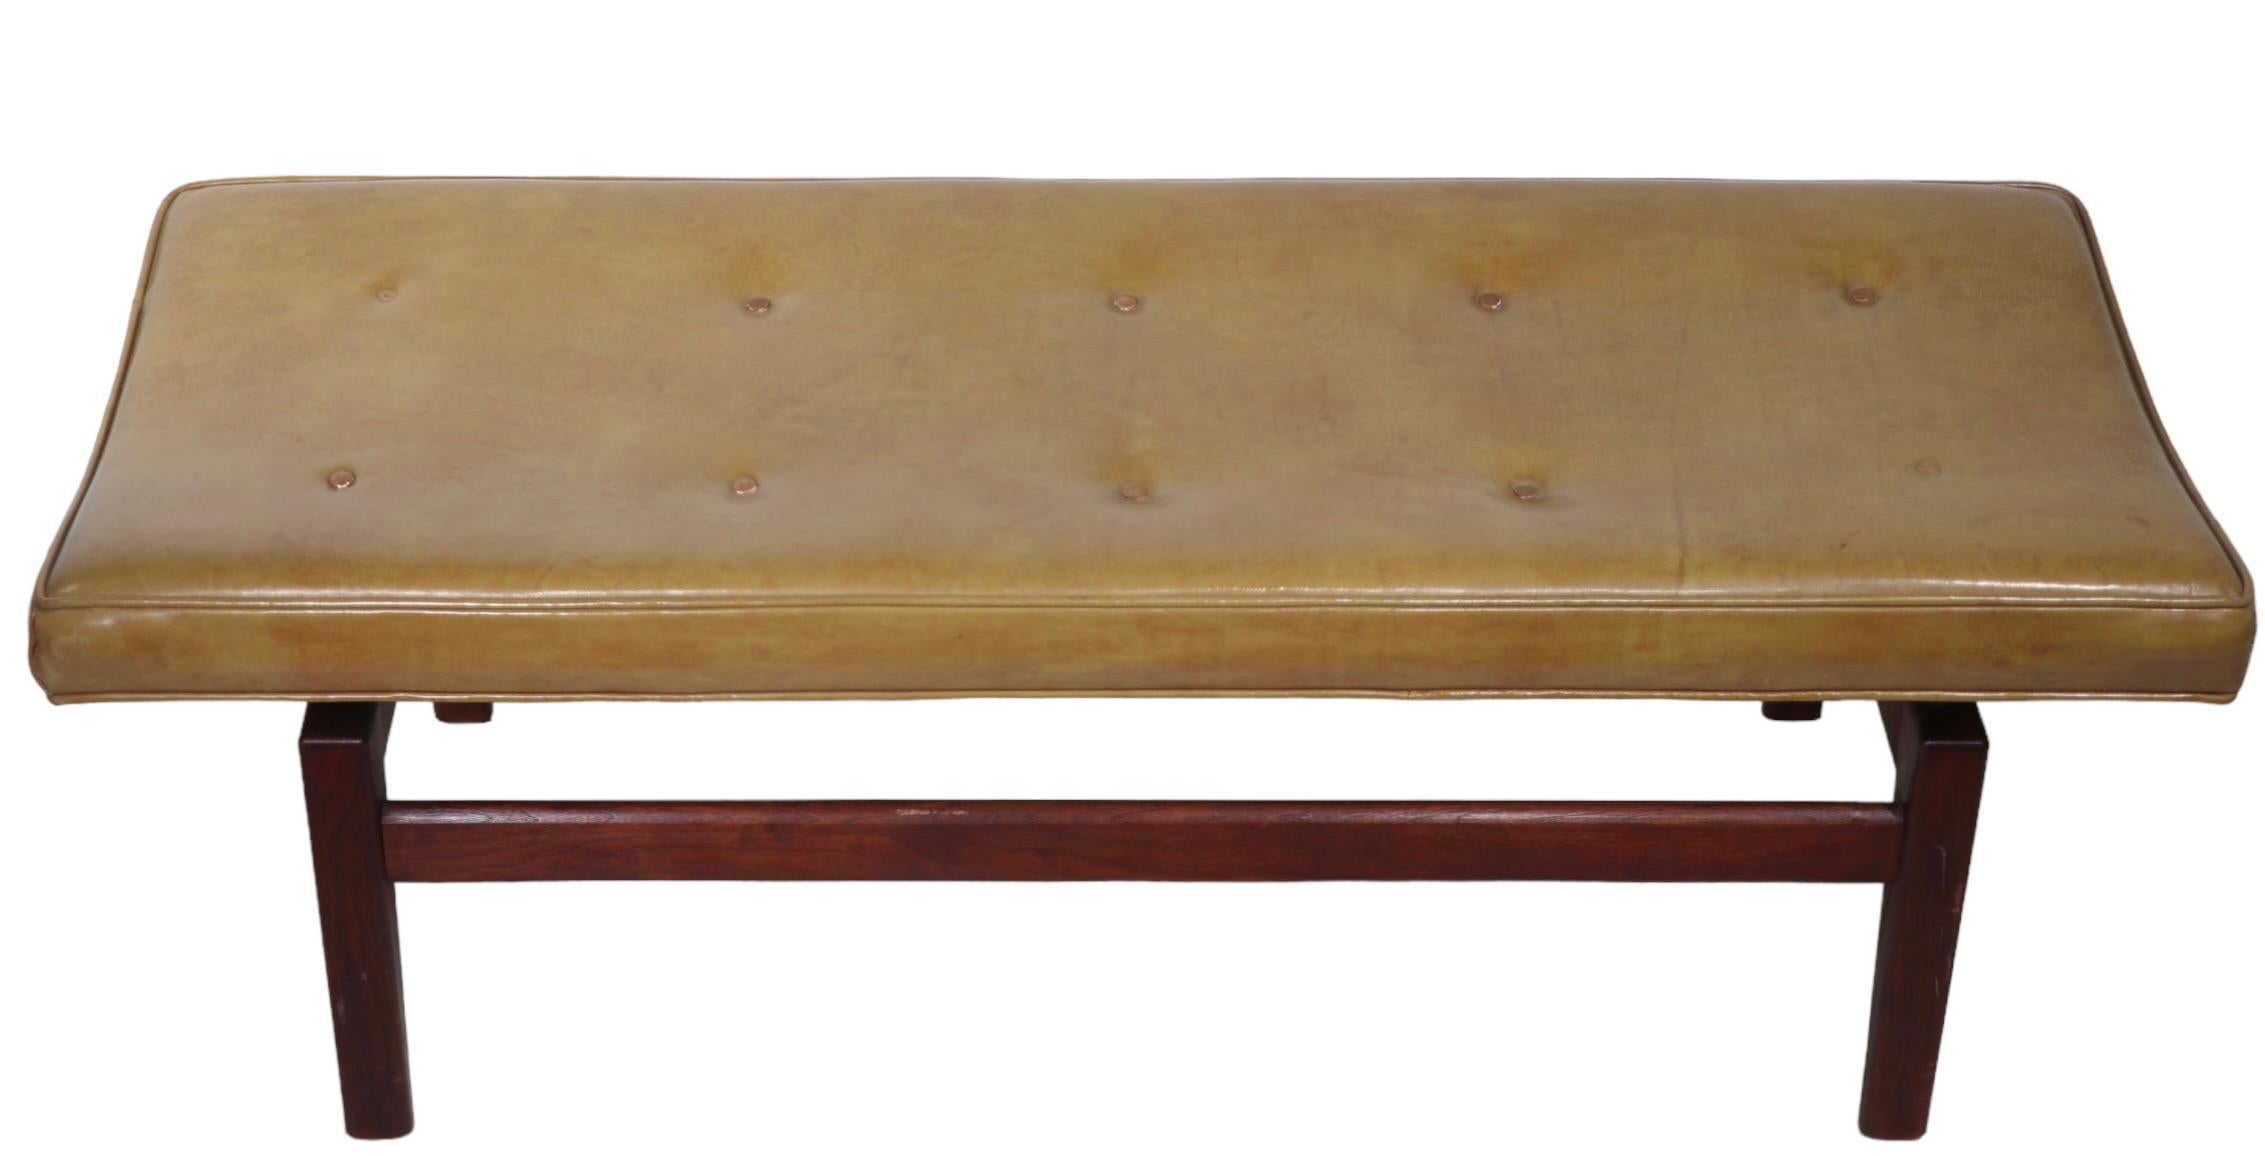   Architectural Mid Century Jens Risom Bench with Walnut Legs and Leather Top  For Sale 1